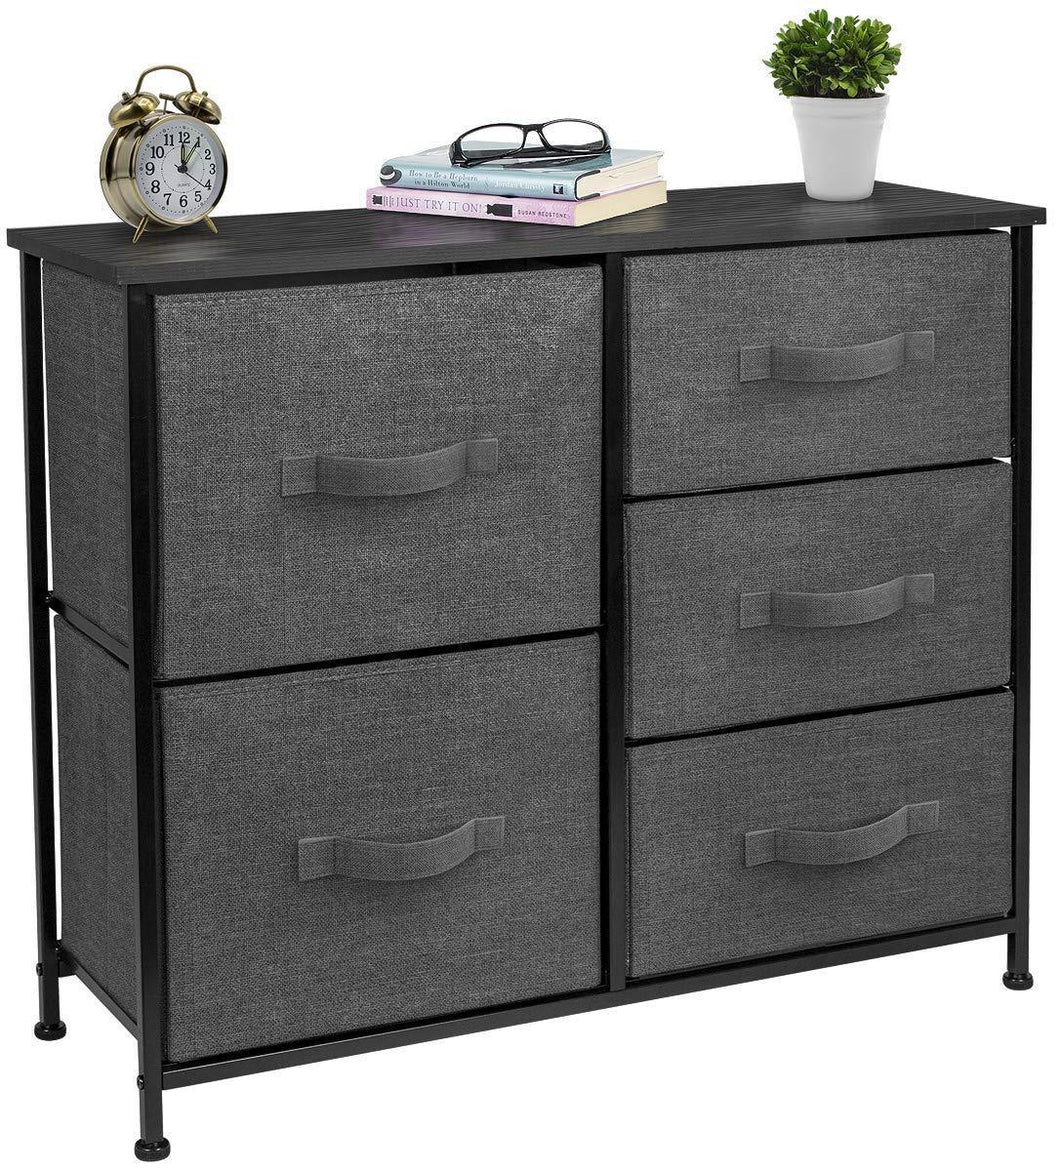 Explore sorbus dresser with 5 drawers furniture storage tower unit for bedroom hallway closet office organization steel frame wood top easy pull fabric bins black charcoal